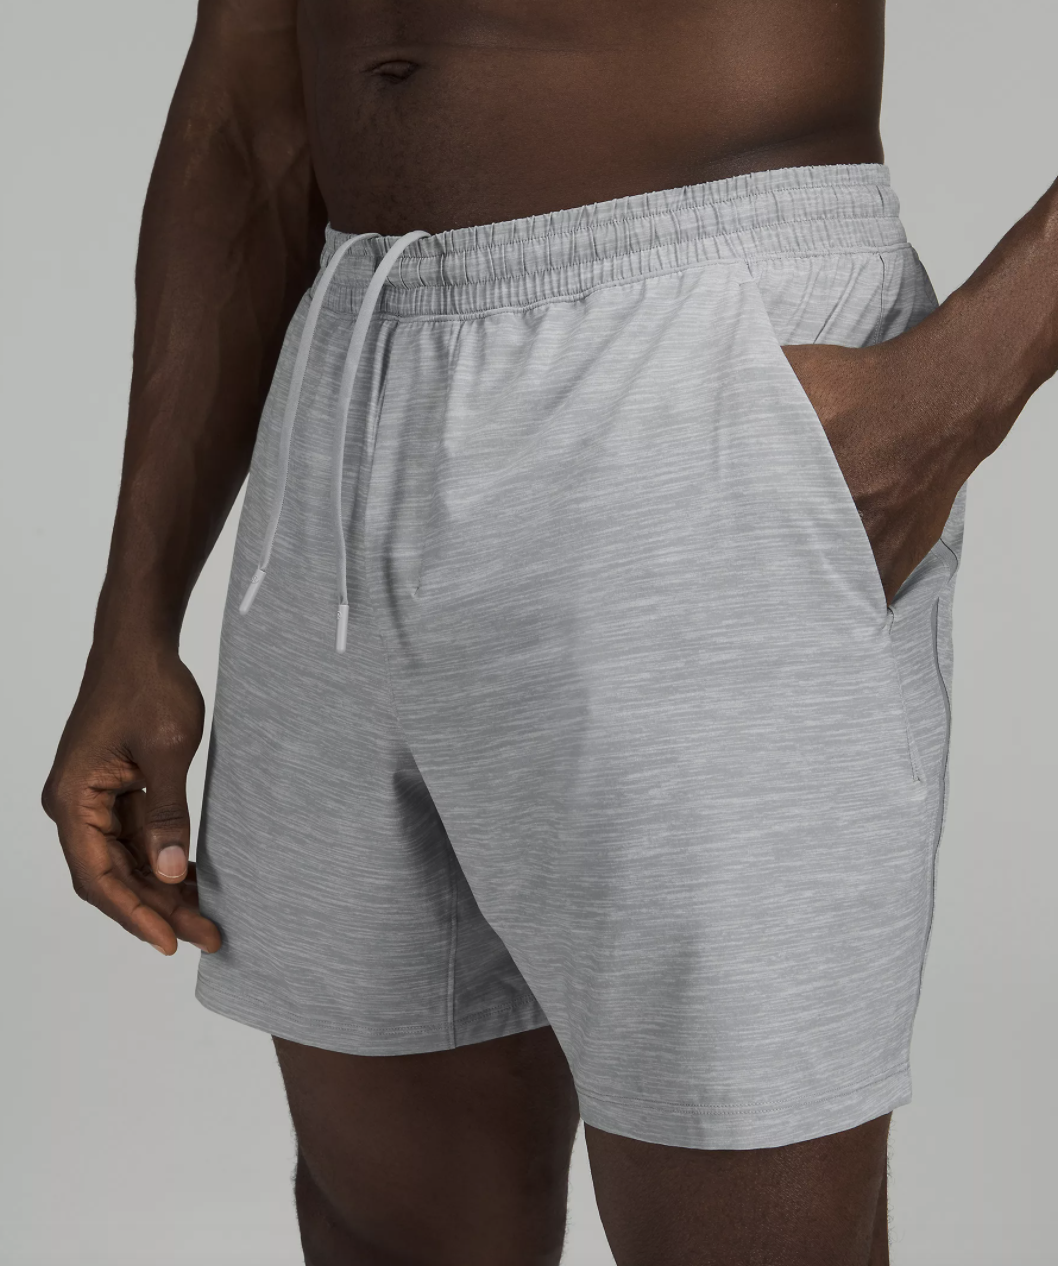 a close up of the unlined running shorts